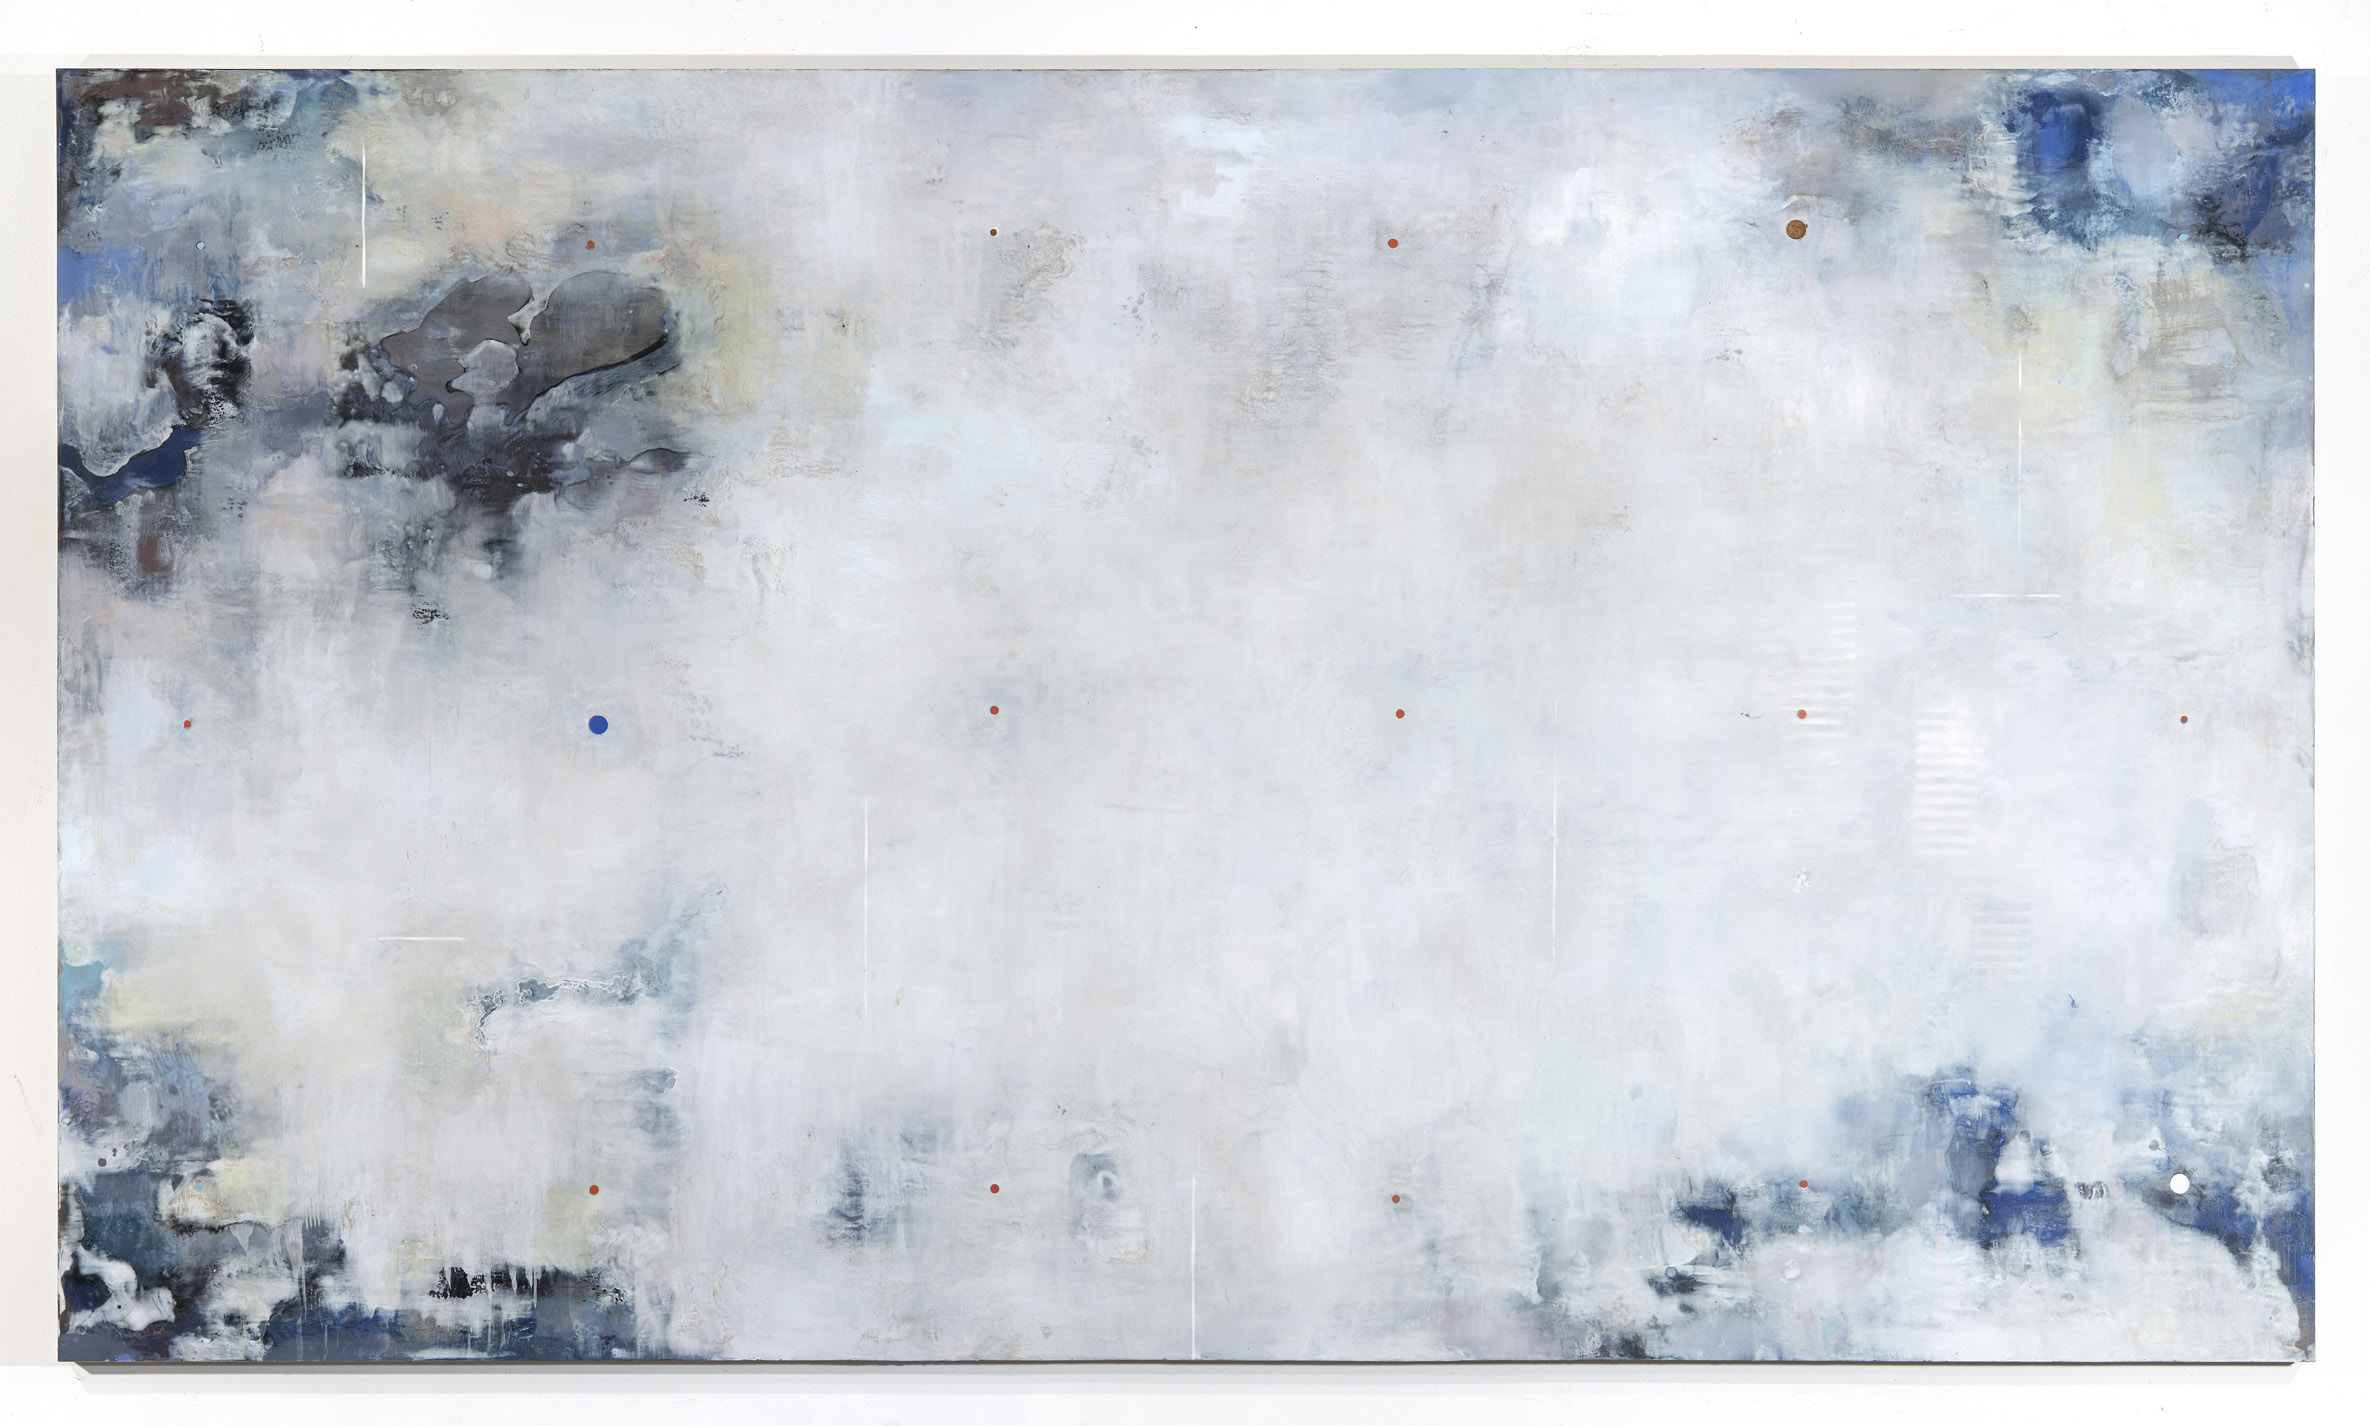 Dust Stories (Echoes), 2015. Wax, resin and pigments on birch panel, 48 x 84 in. 